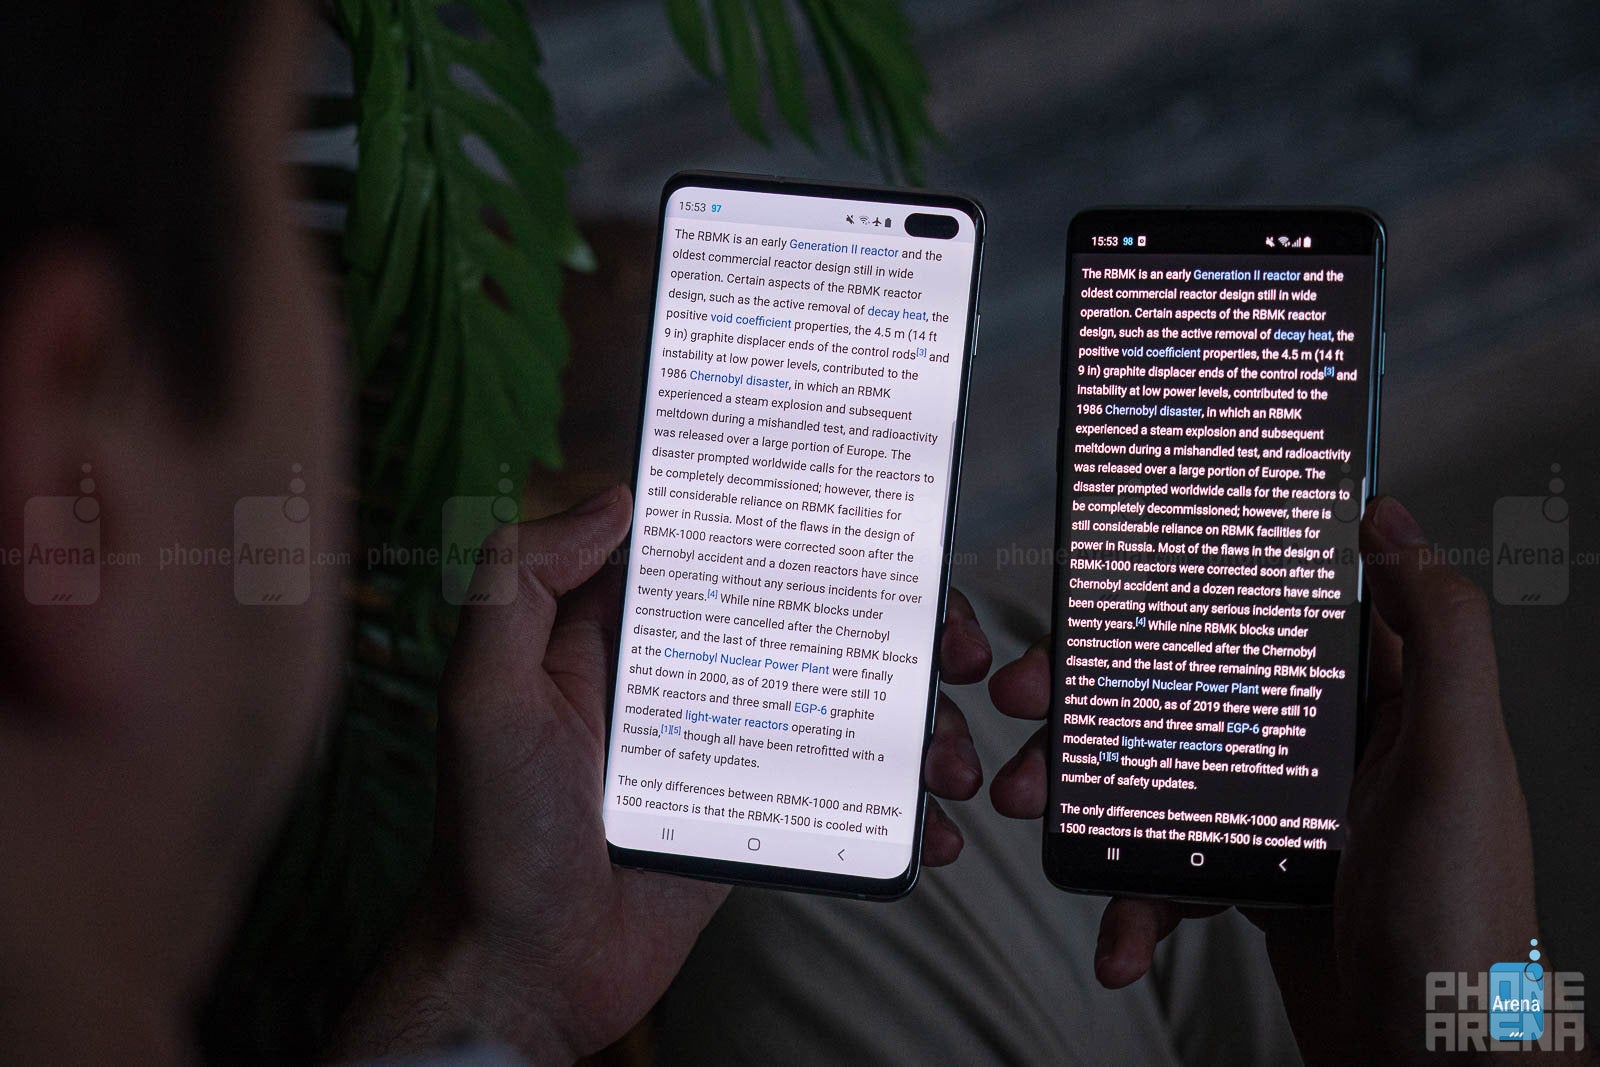 Dark mode is god-send in dimly lit environments - The pros and cons of Dark Mode: Here's when to use it and why